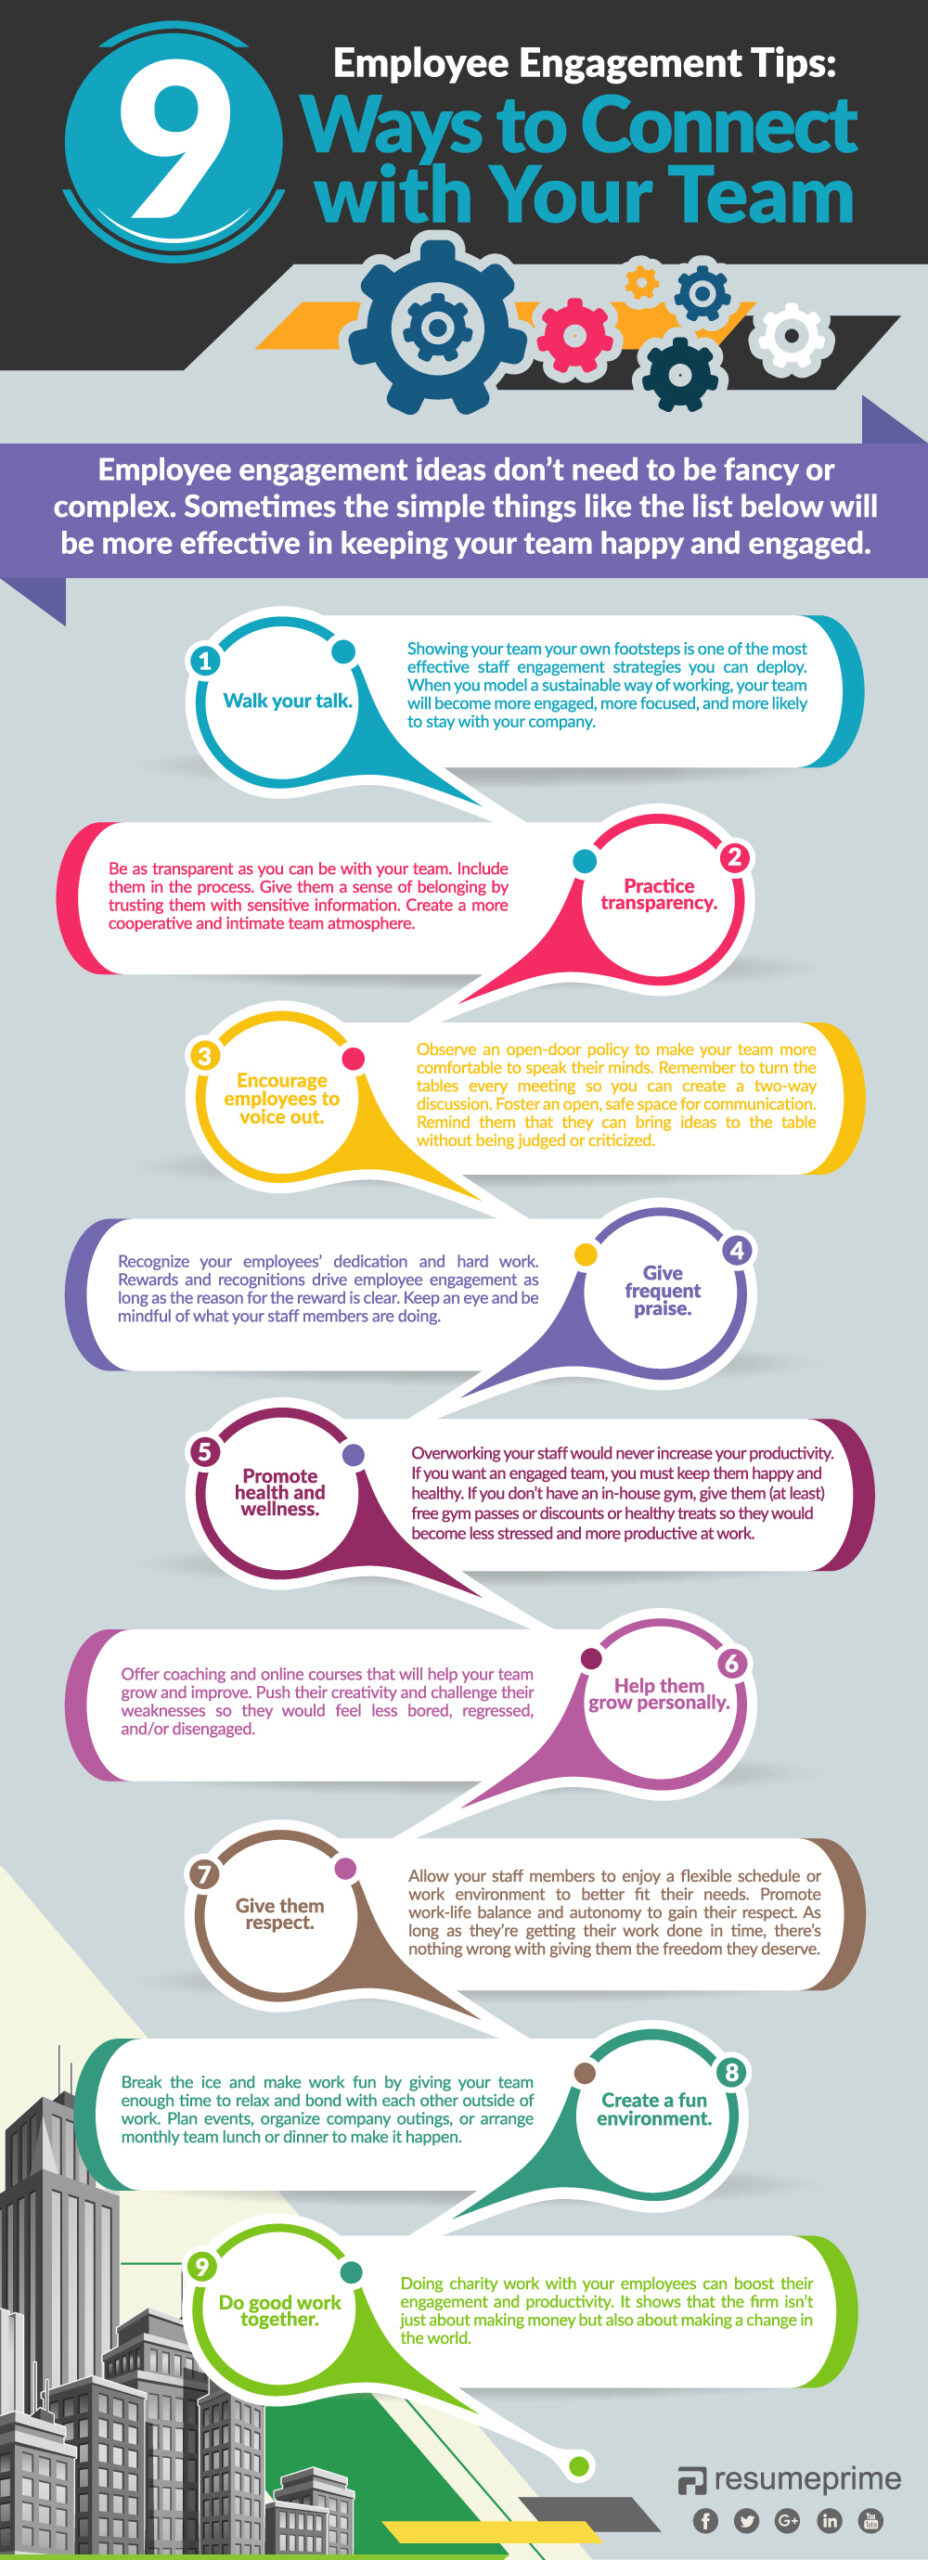 Employee Engagement Ideas and Ways to Connect with Your Team - Infographic - Resume Prime